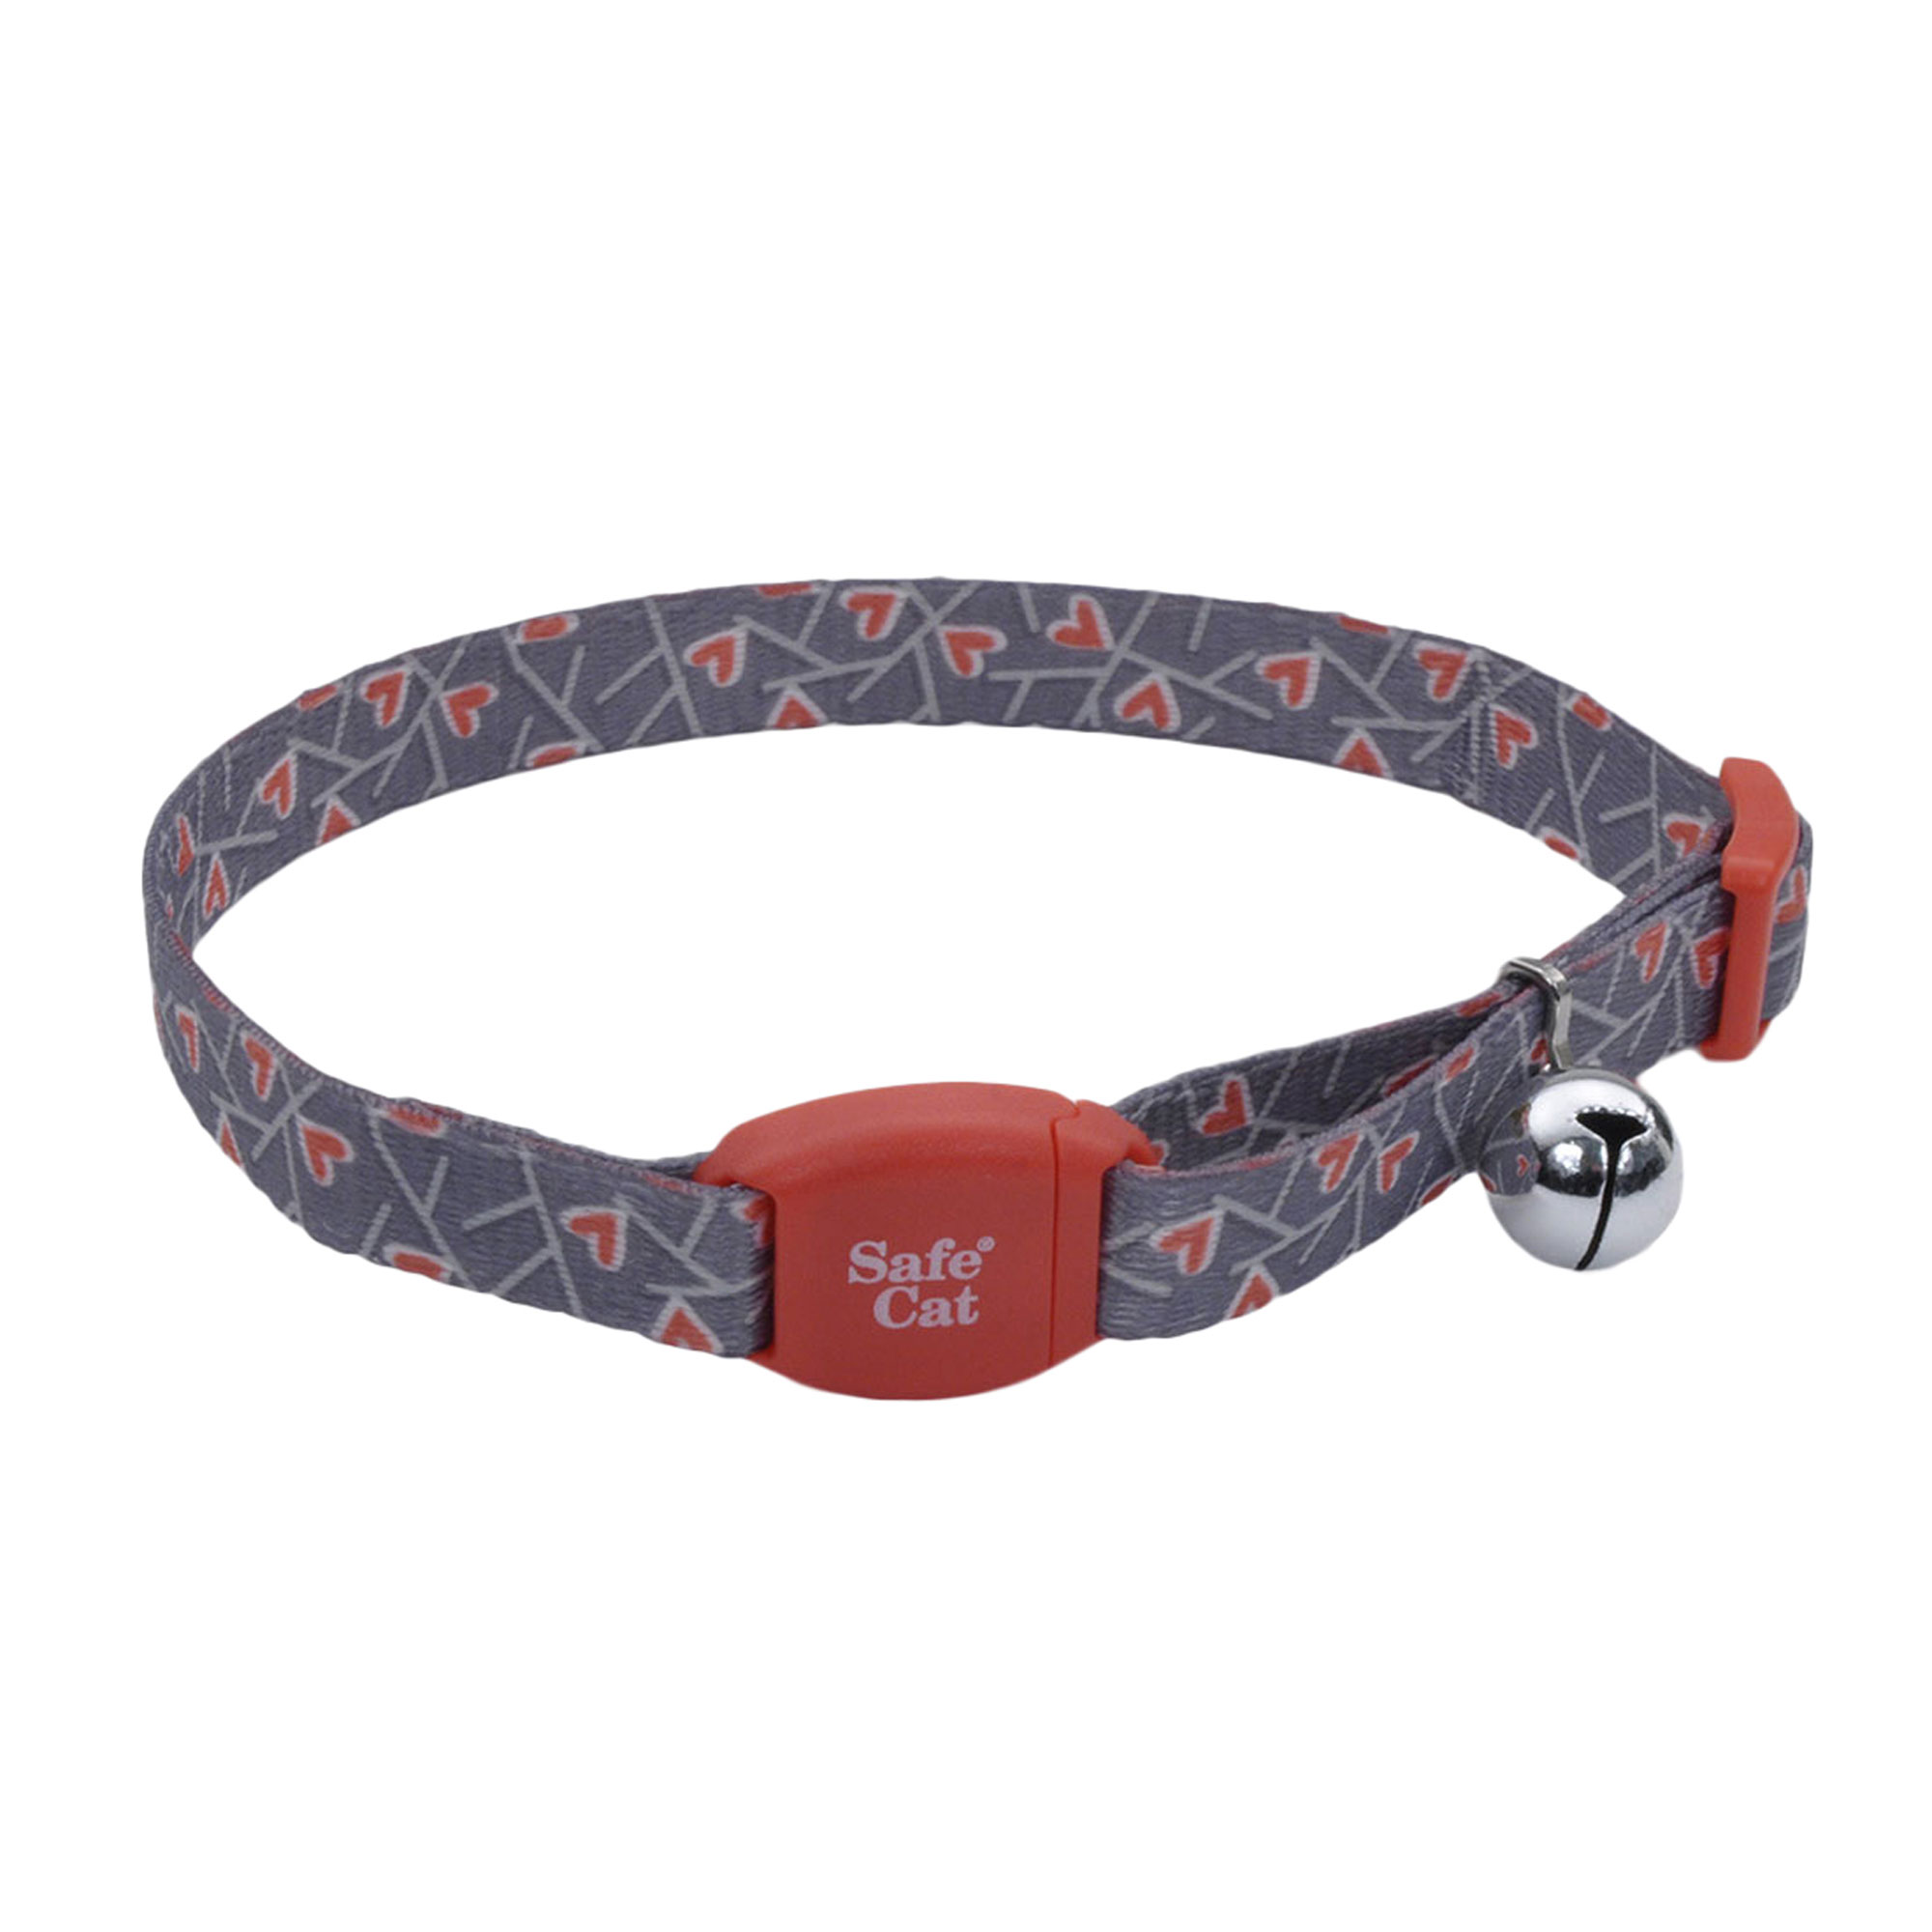 Safe CatÂ® Adjustable Breakaway Cat Collar with Magnetic Buckle, Salmon Heart Charcoal, 3/8